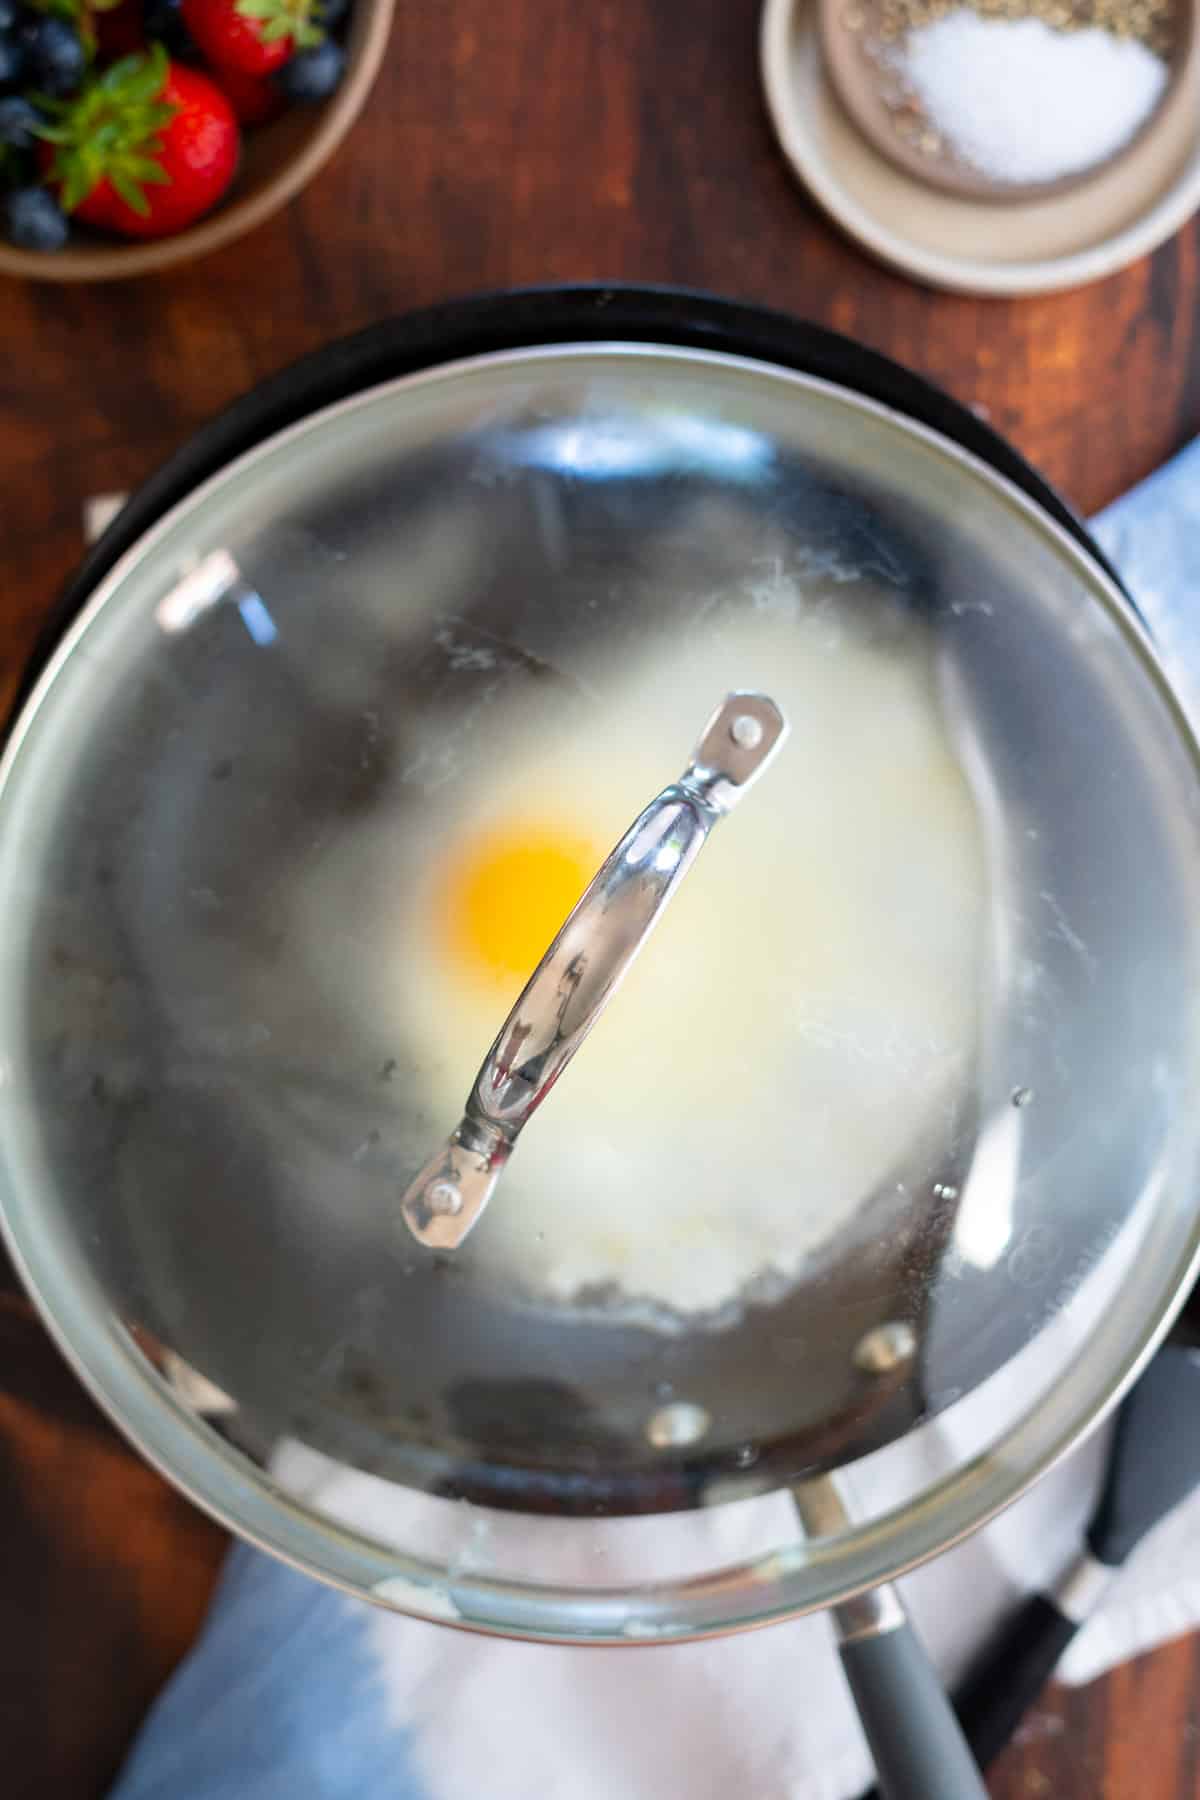 Cooking a sunny side up egg with a lid on the skillet.